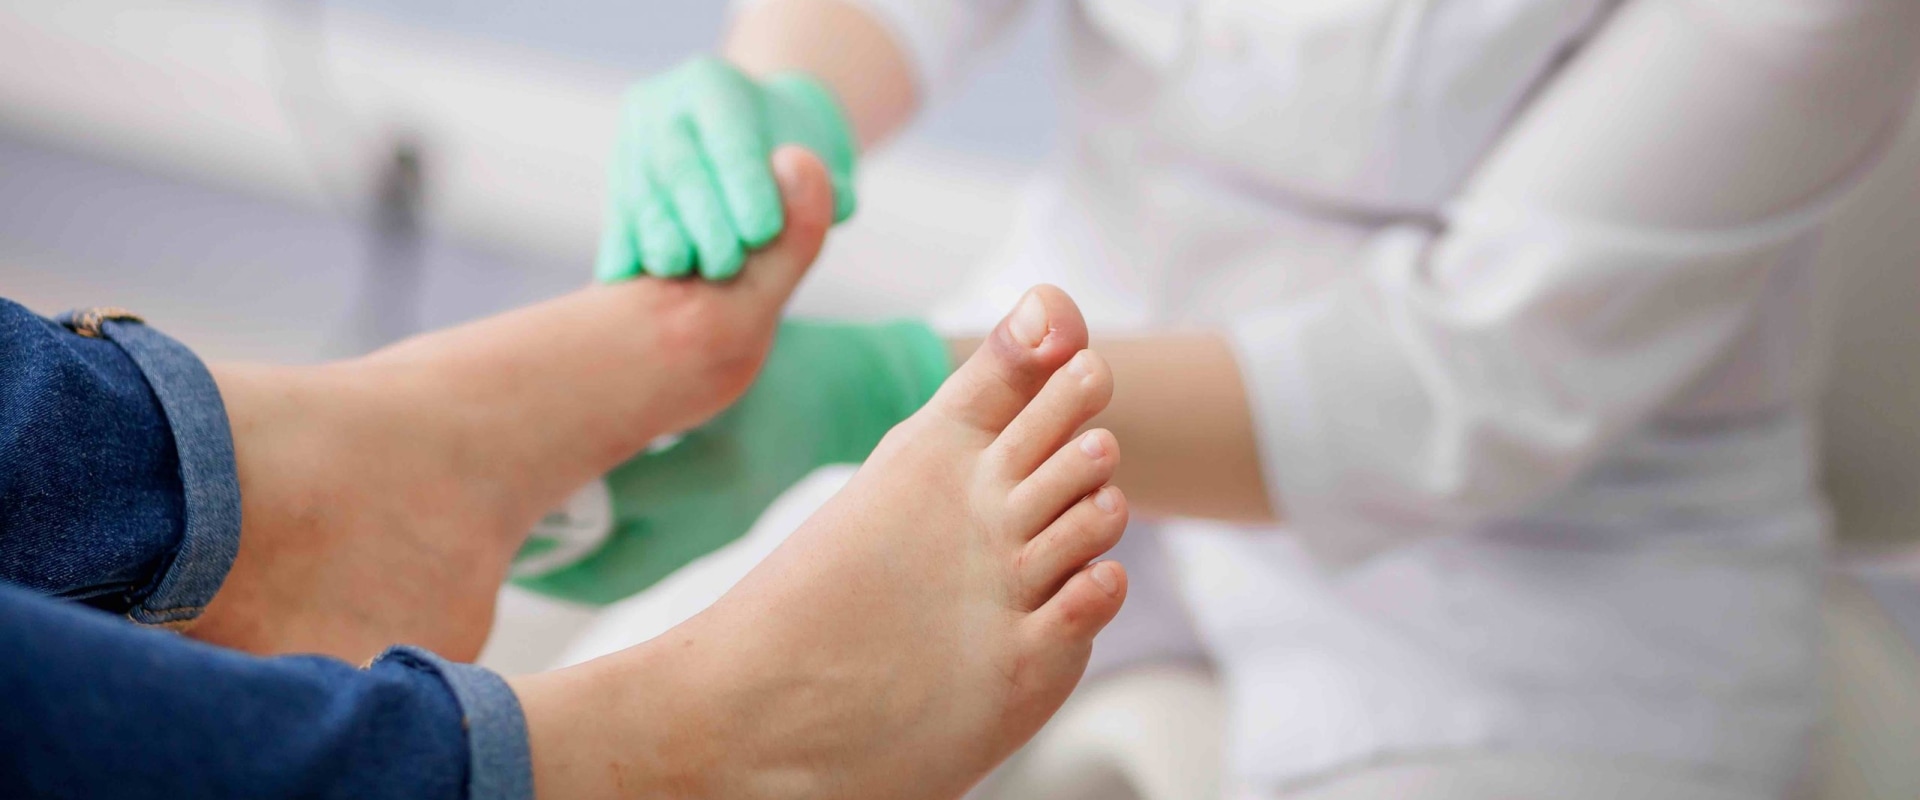 The Top 10 Foot Problems Treated by Podiatrists